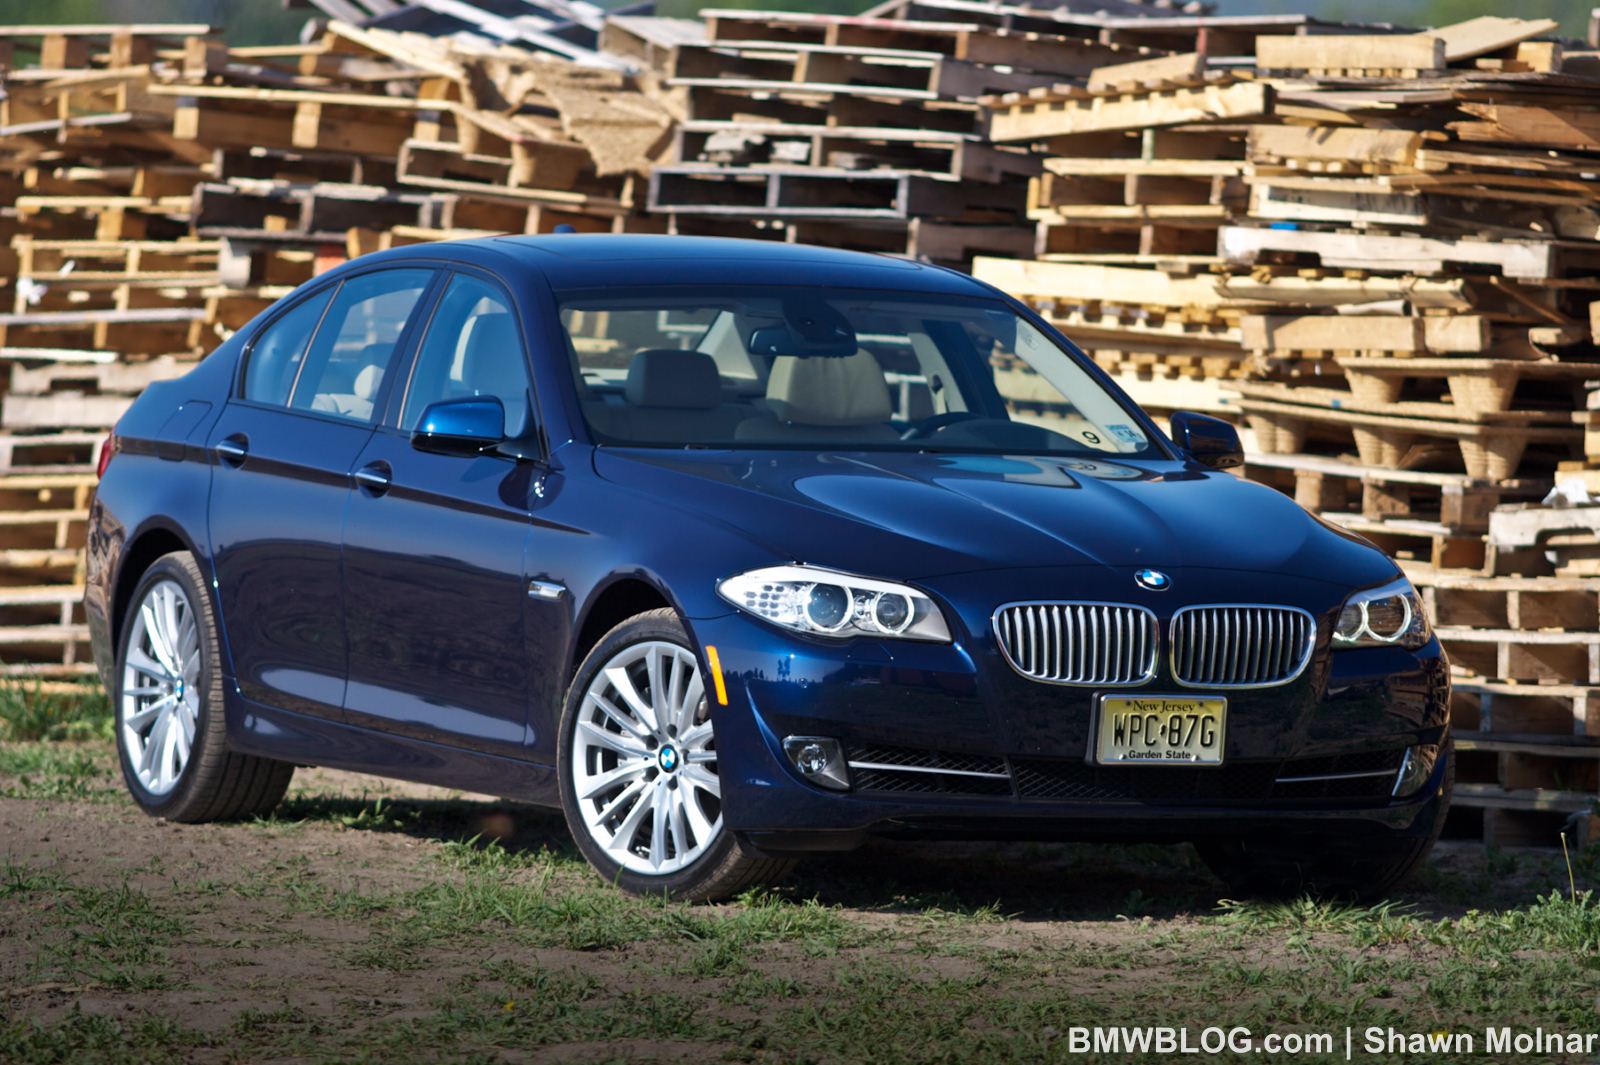 Video: 2011 BMW 535i Review from Consumer Reports